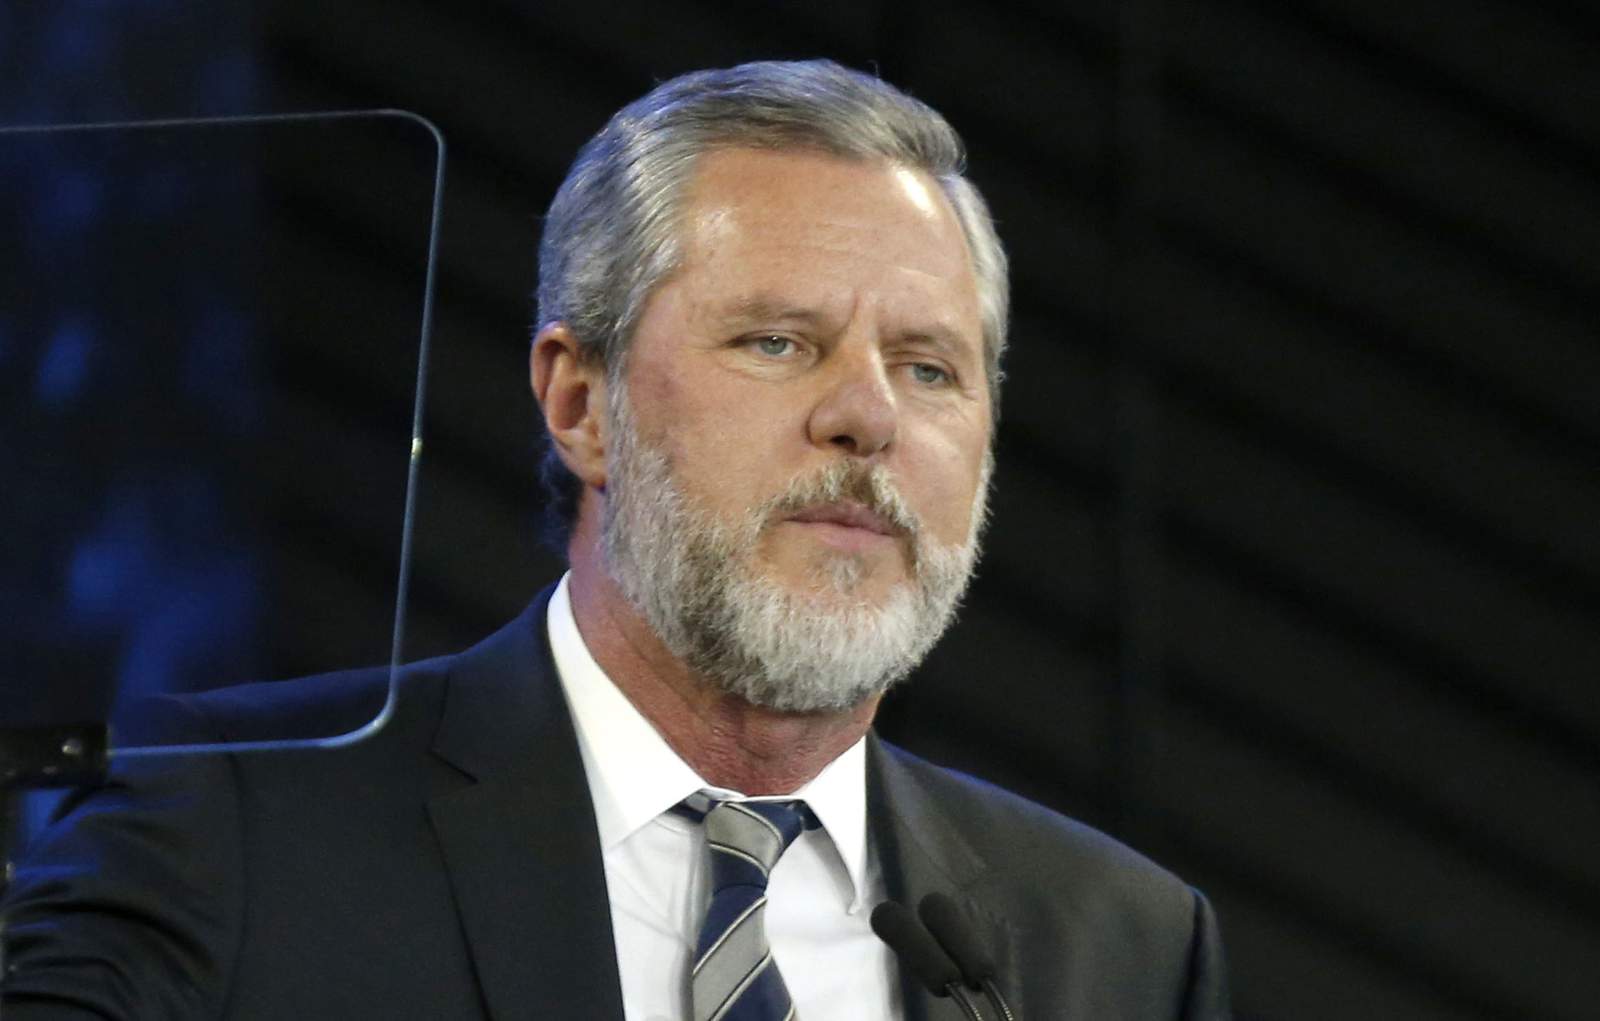 Report: Officers respond to fall at Falwell home, find empty alcohol containers